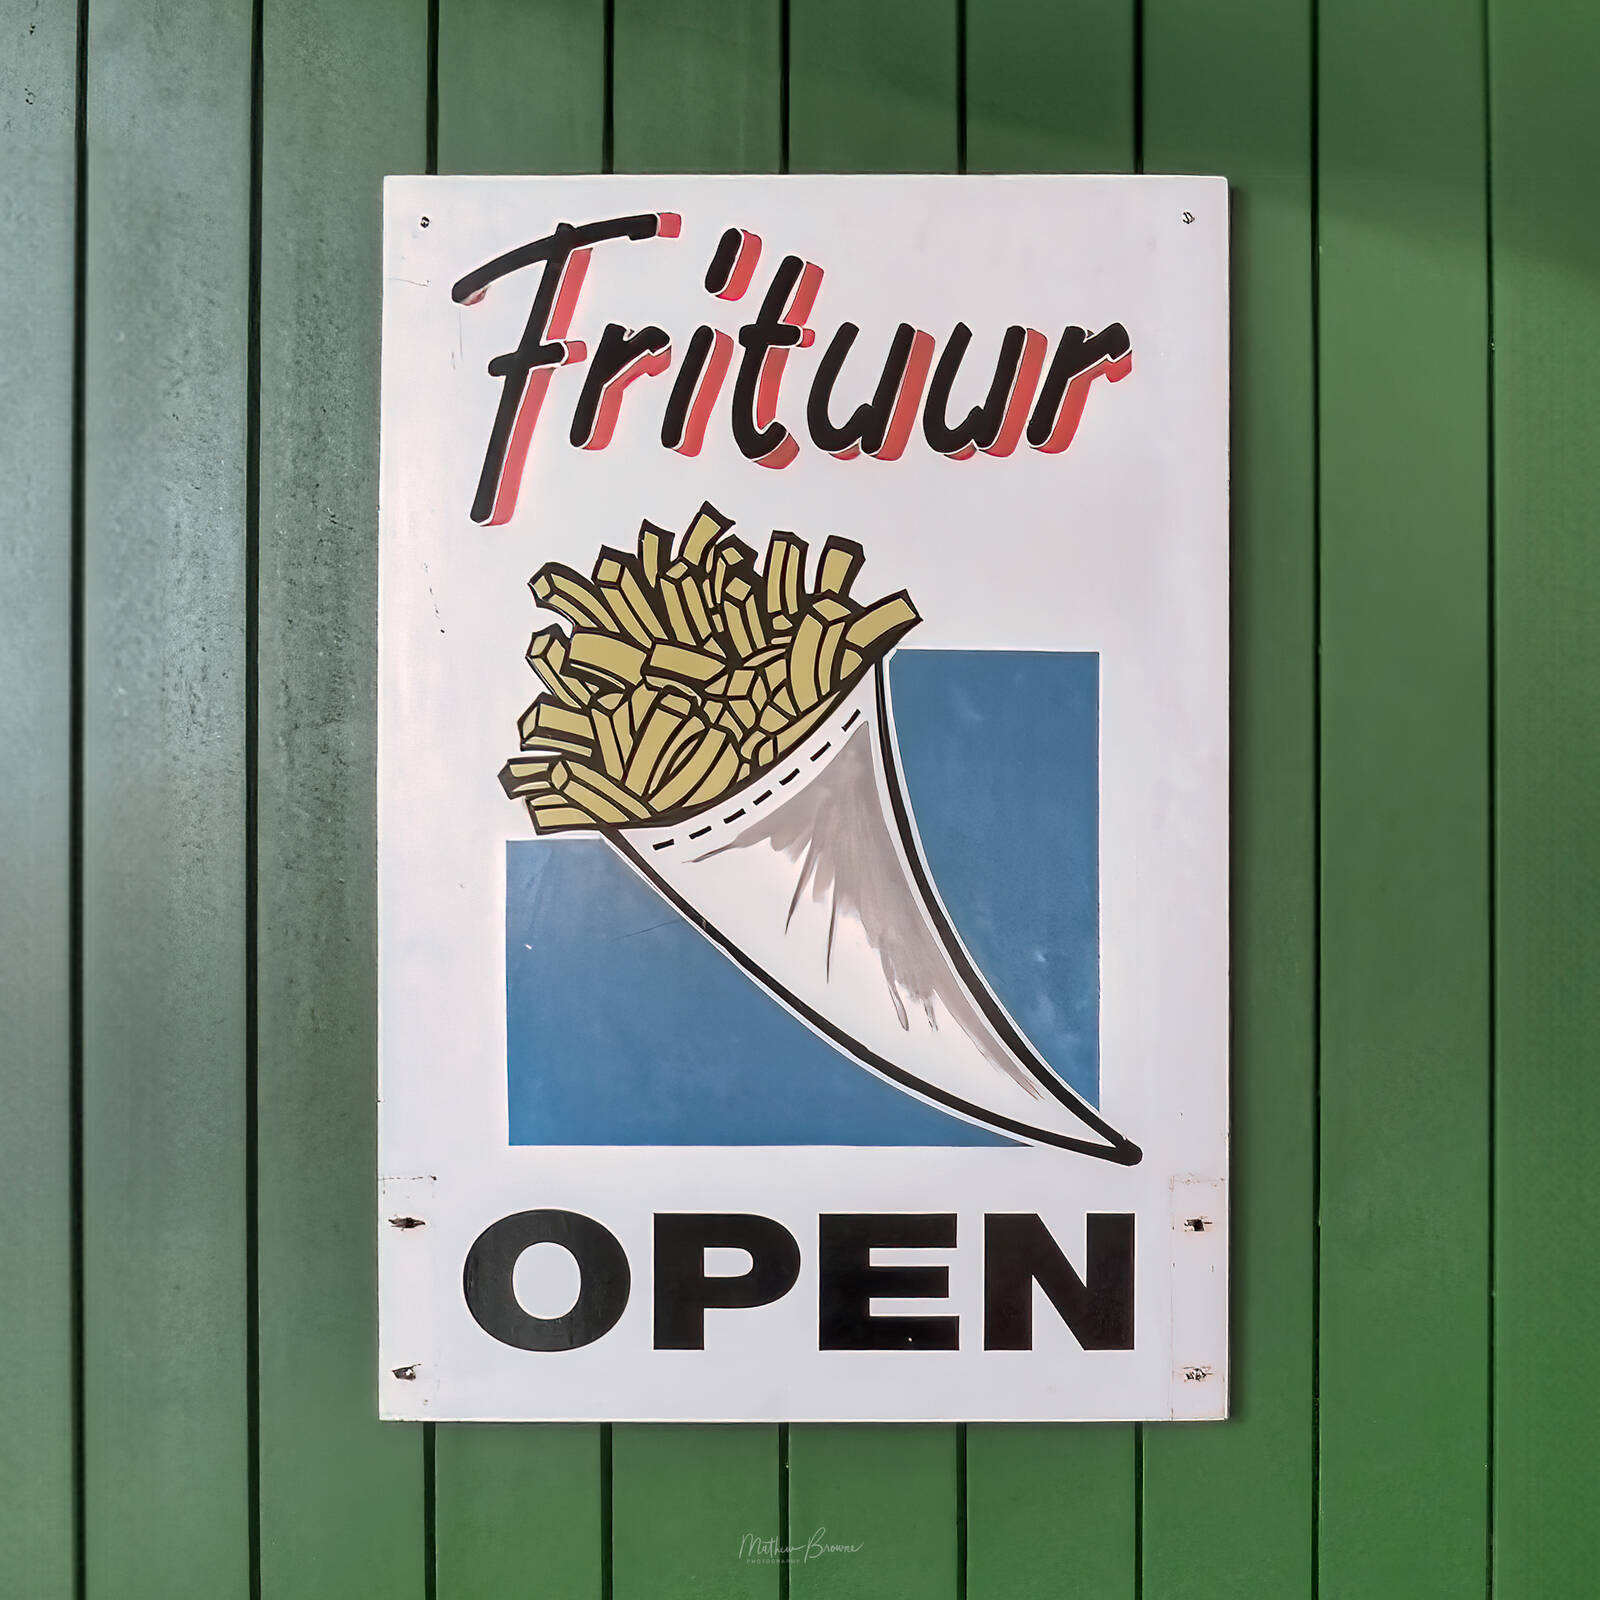 Image of Frietmuseum by Mathew Browne